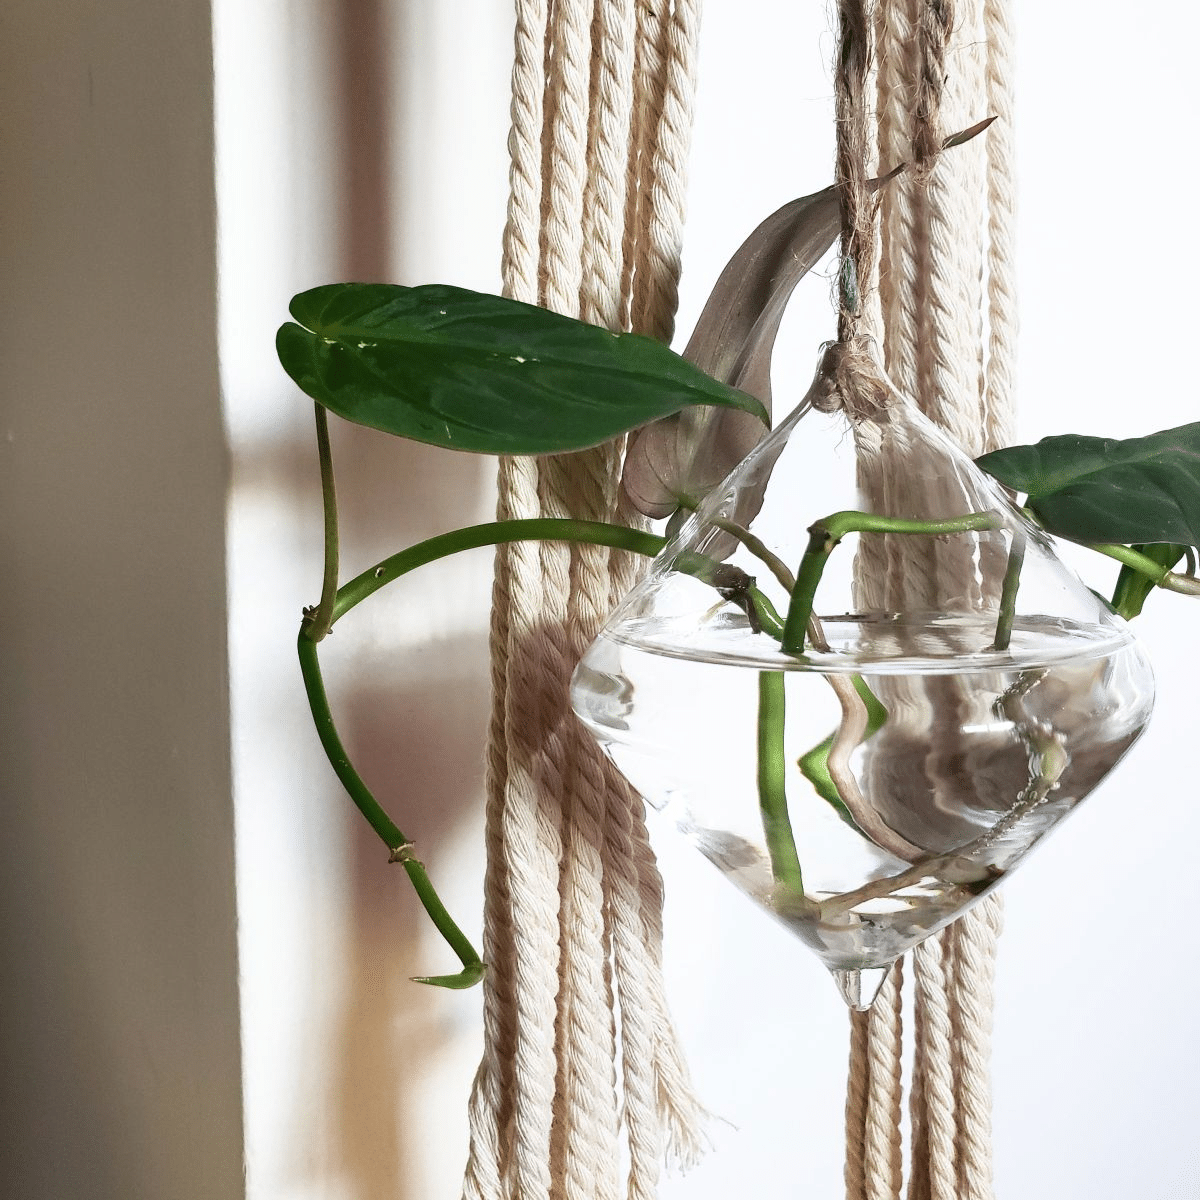 Propagating Philodendron Micans in water